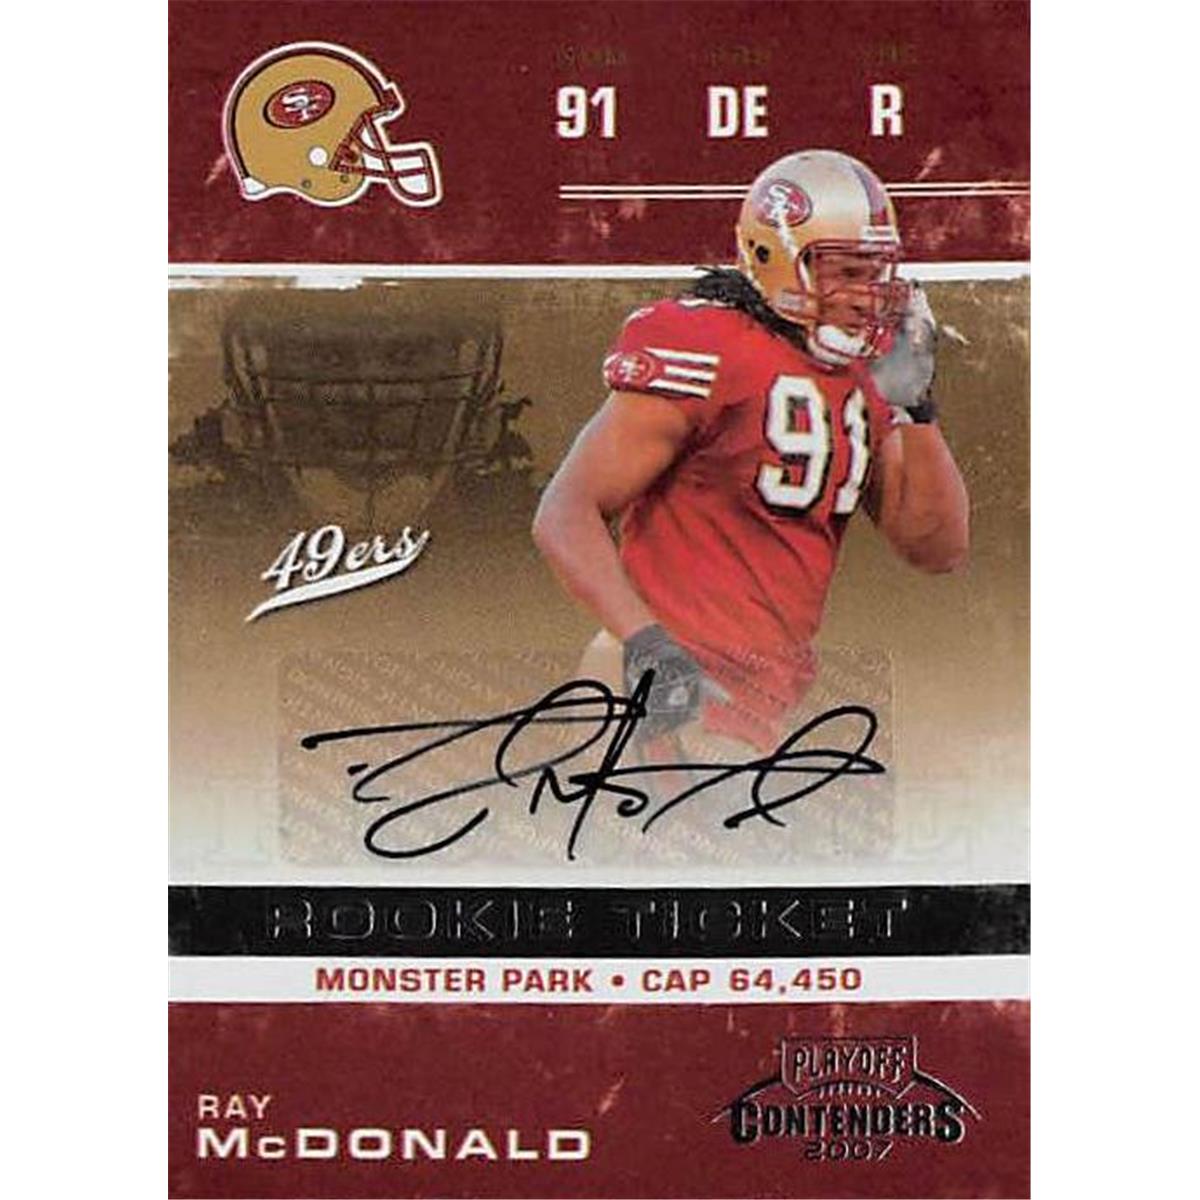 Picture of Autograph Warehouse 377937 Ray McDonald Autographed Football Card - San Francisco 49ers 2007 Playoff Contenders Rookie Ticket No.210